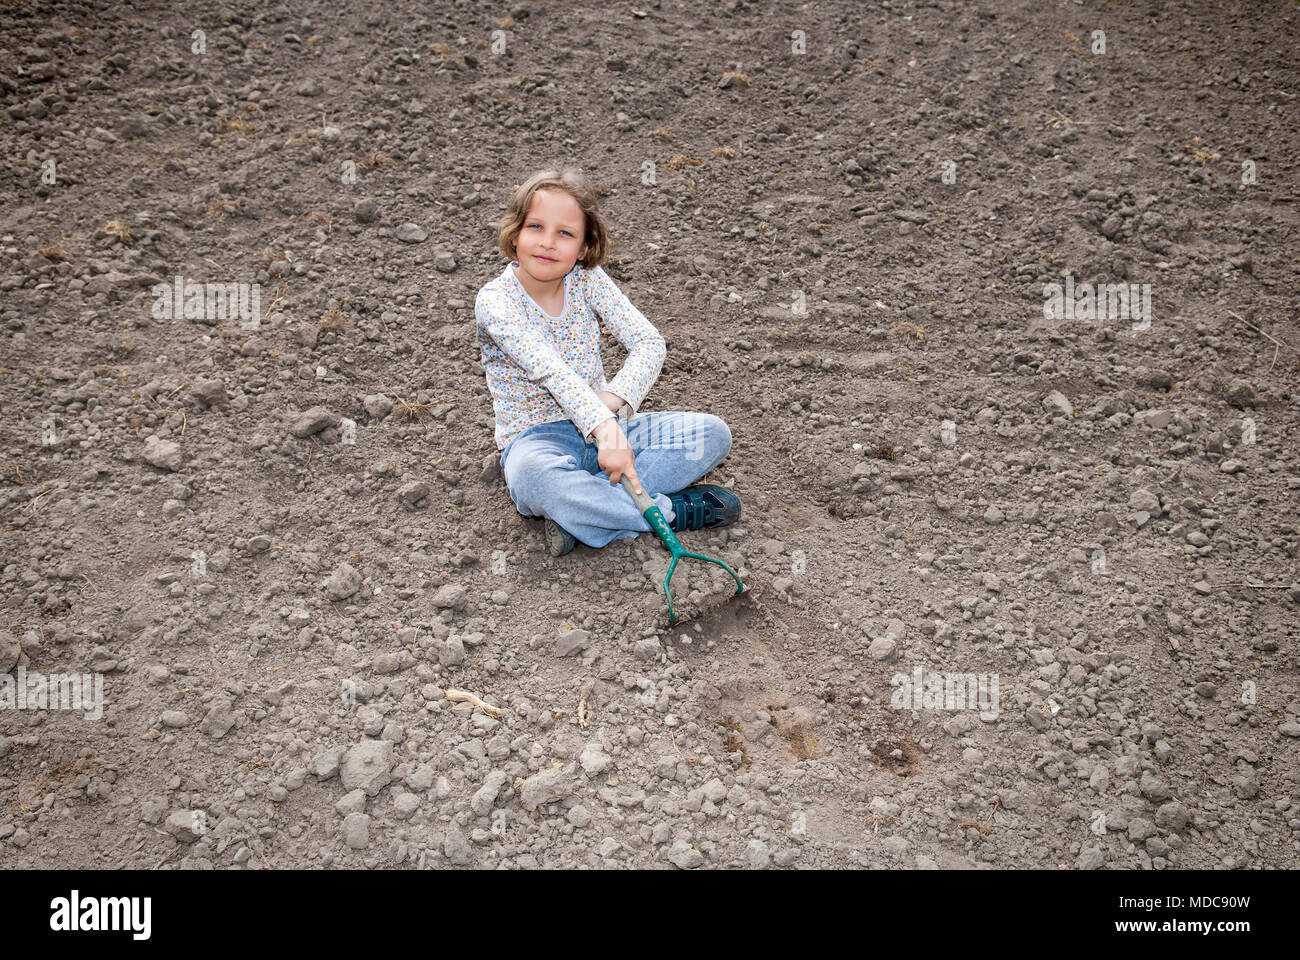 Girl digging in organic soil by hoe. Stock Photo